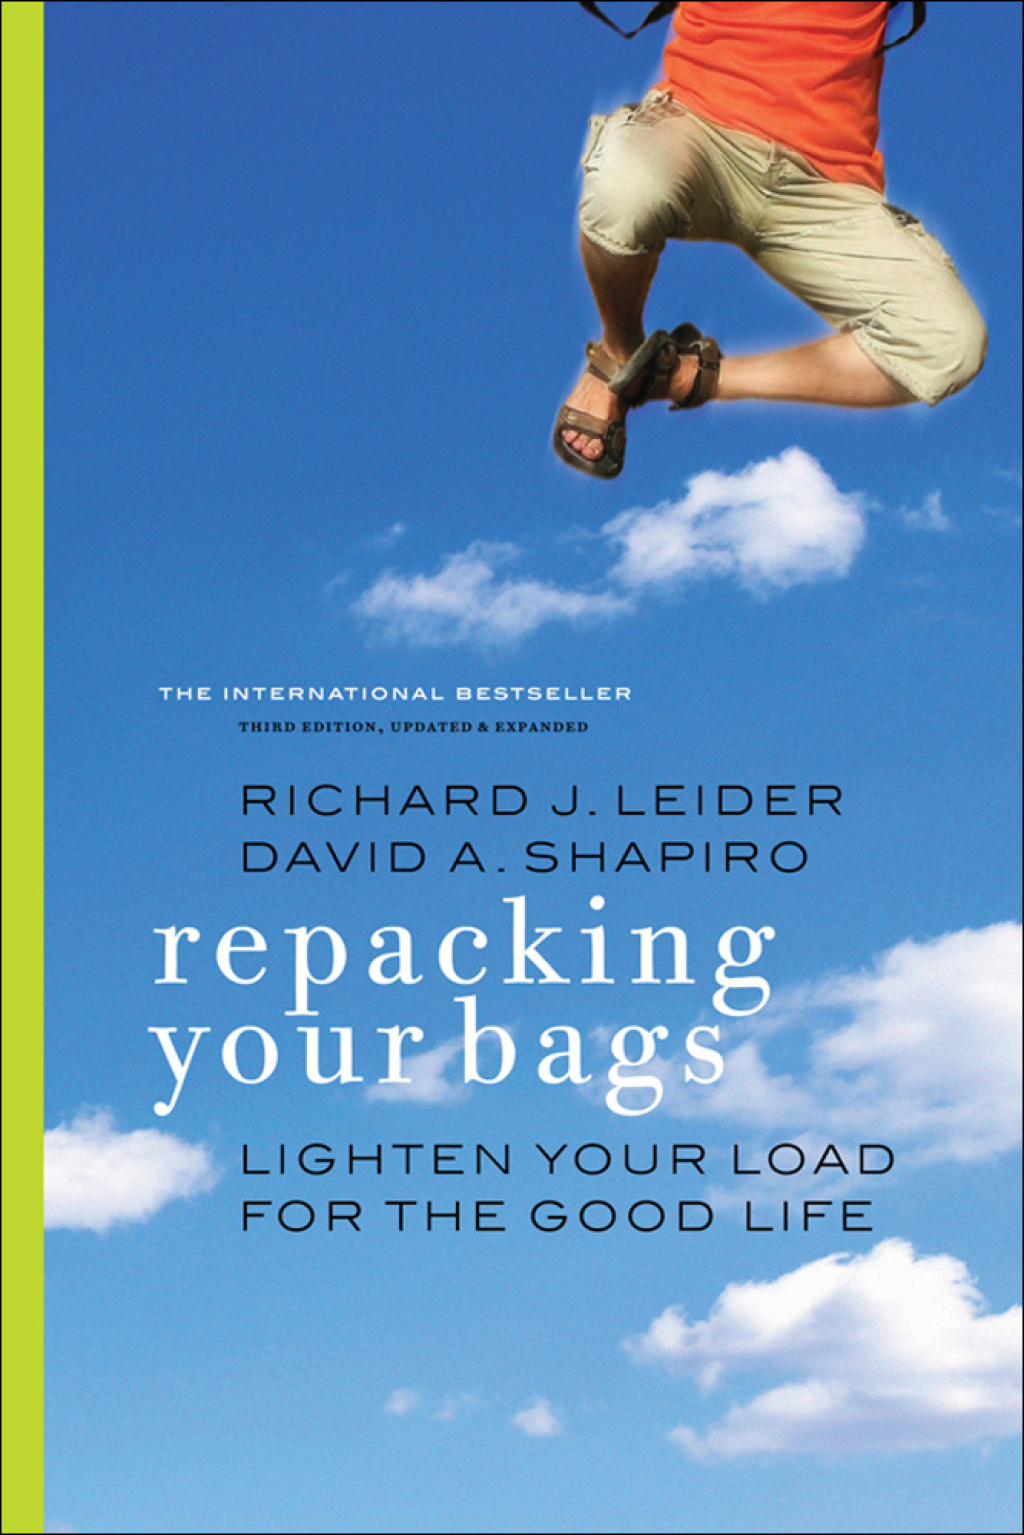 Repacking Your Bags: Lighten Your Load for the Good Life - 3rd Edition (eBook Rental)